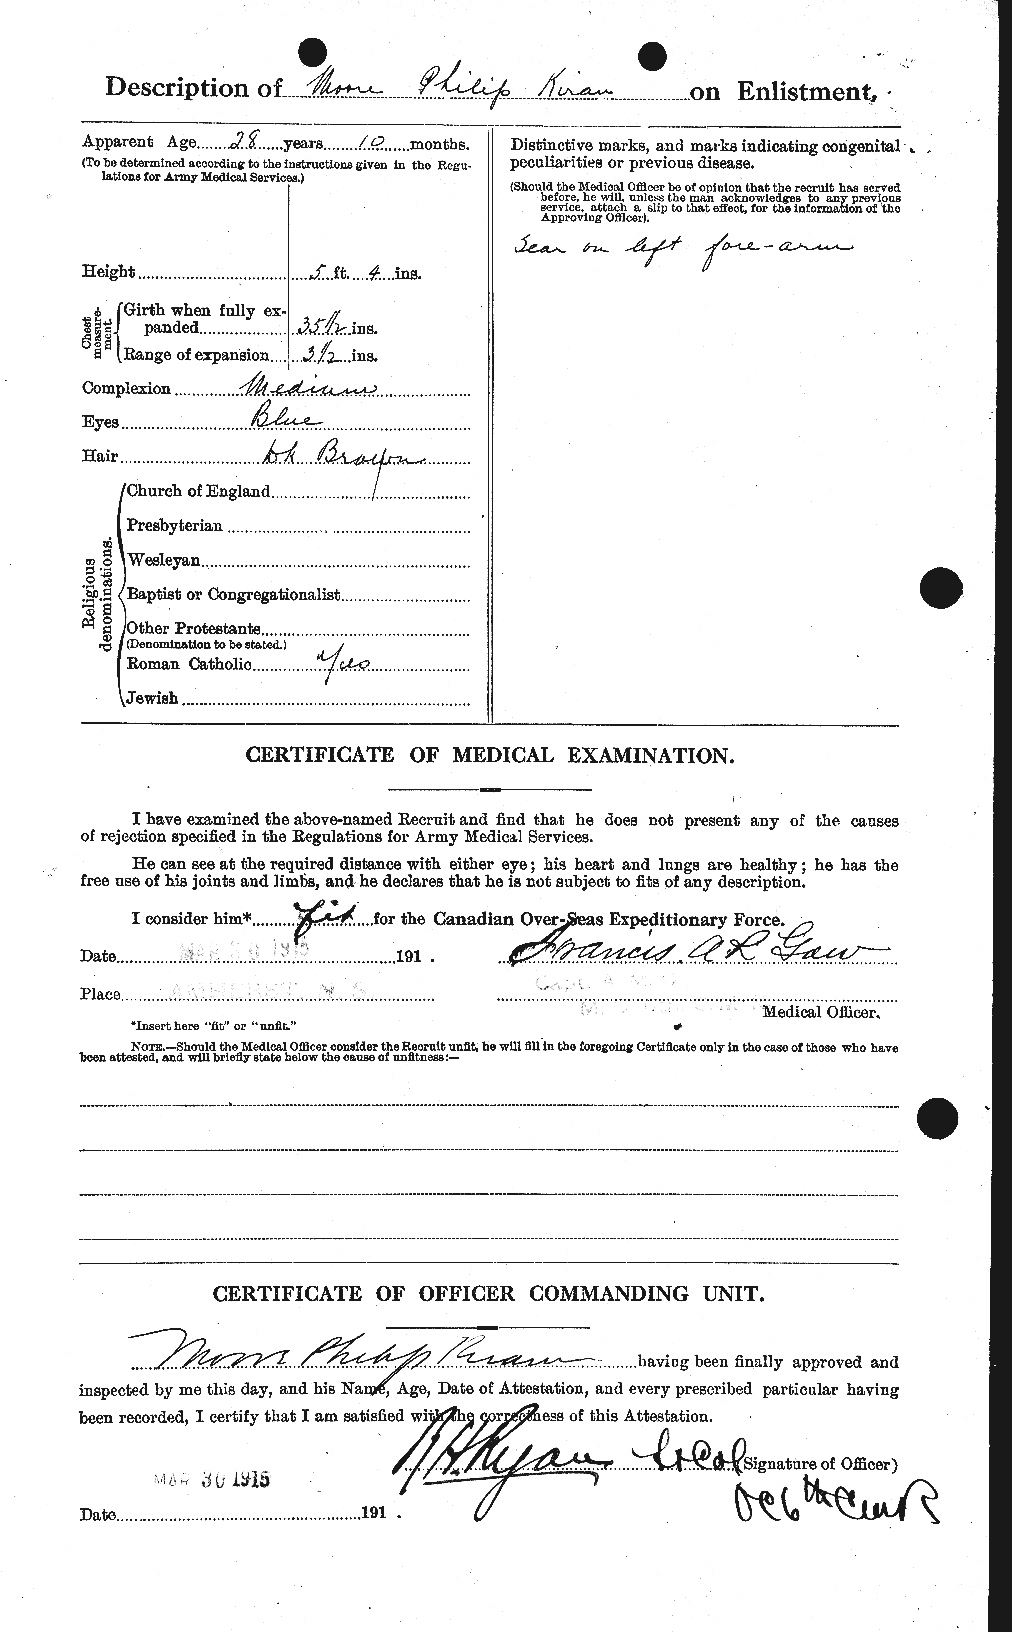 Personnel Records of the First World War - CEF 503501b